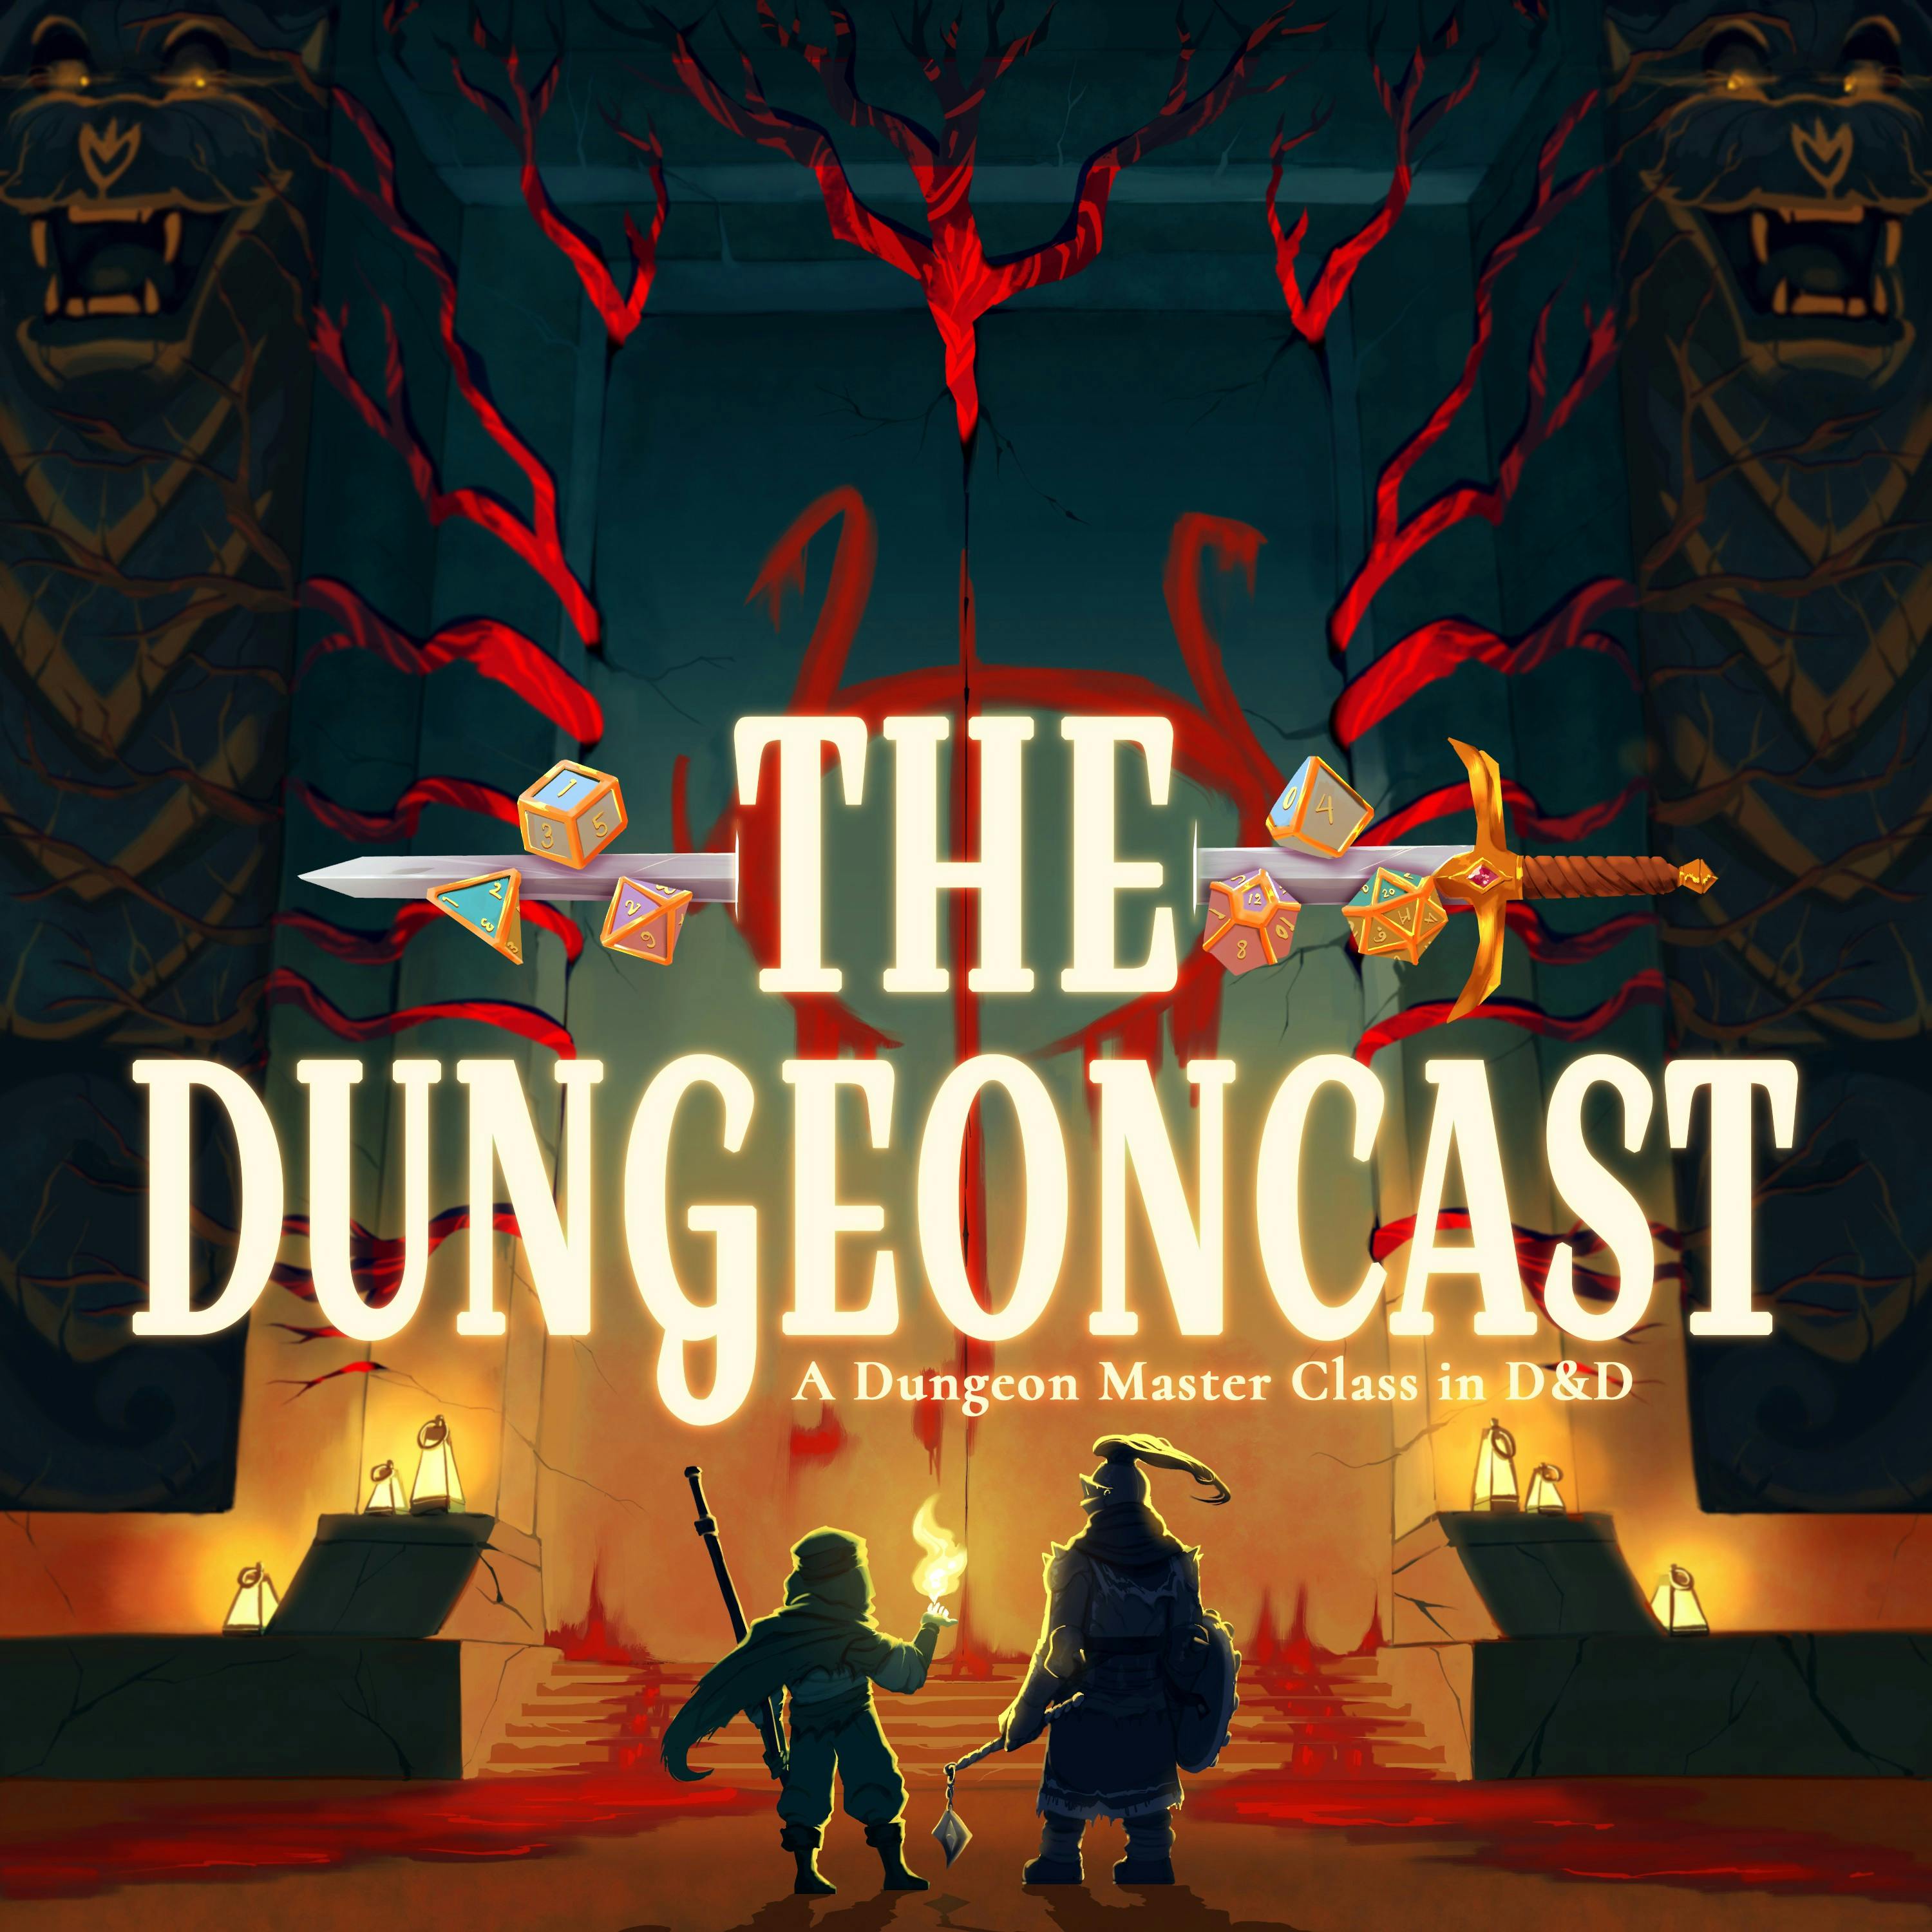 The Dungeoncast podcast